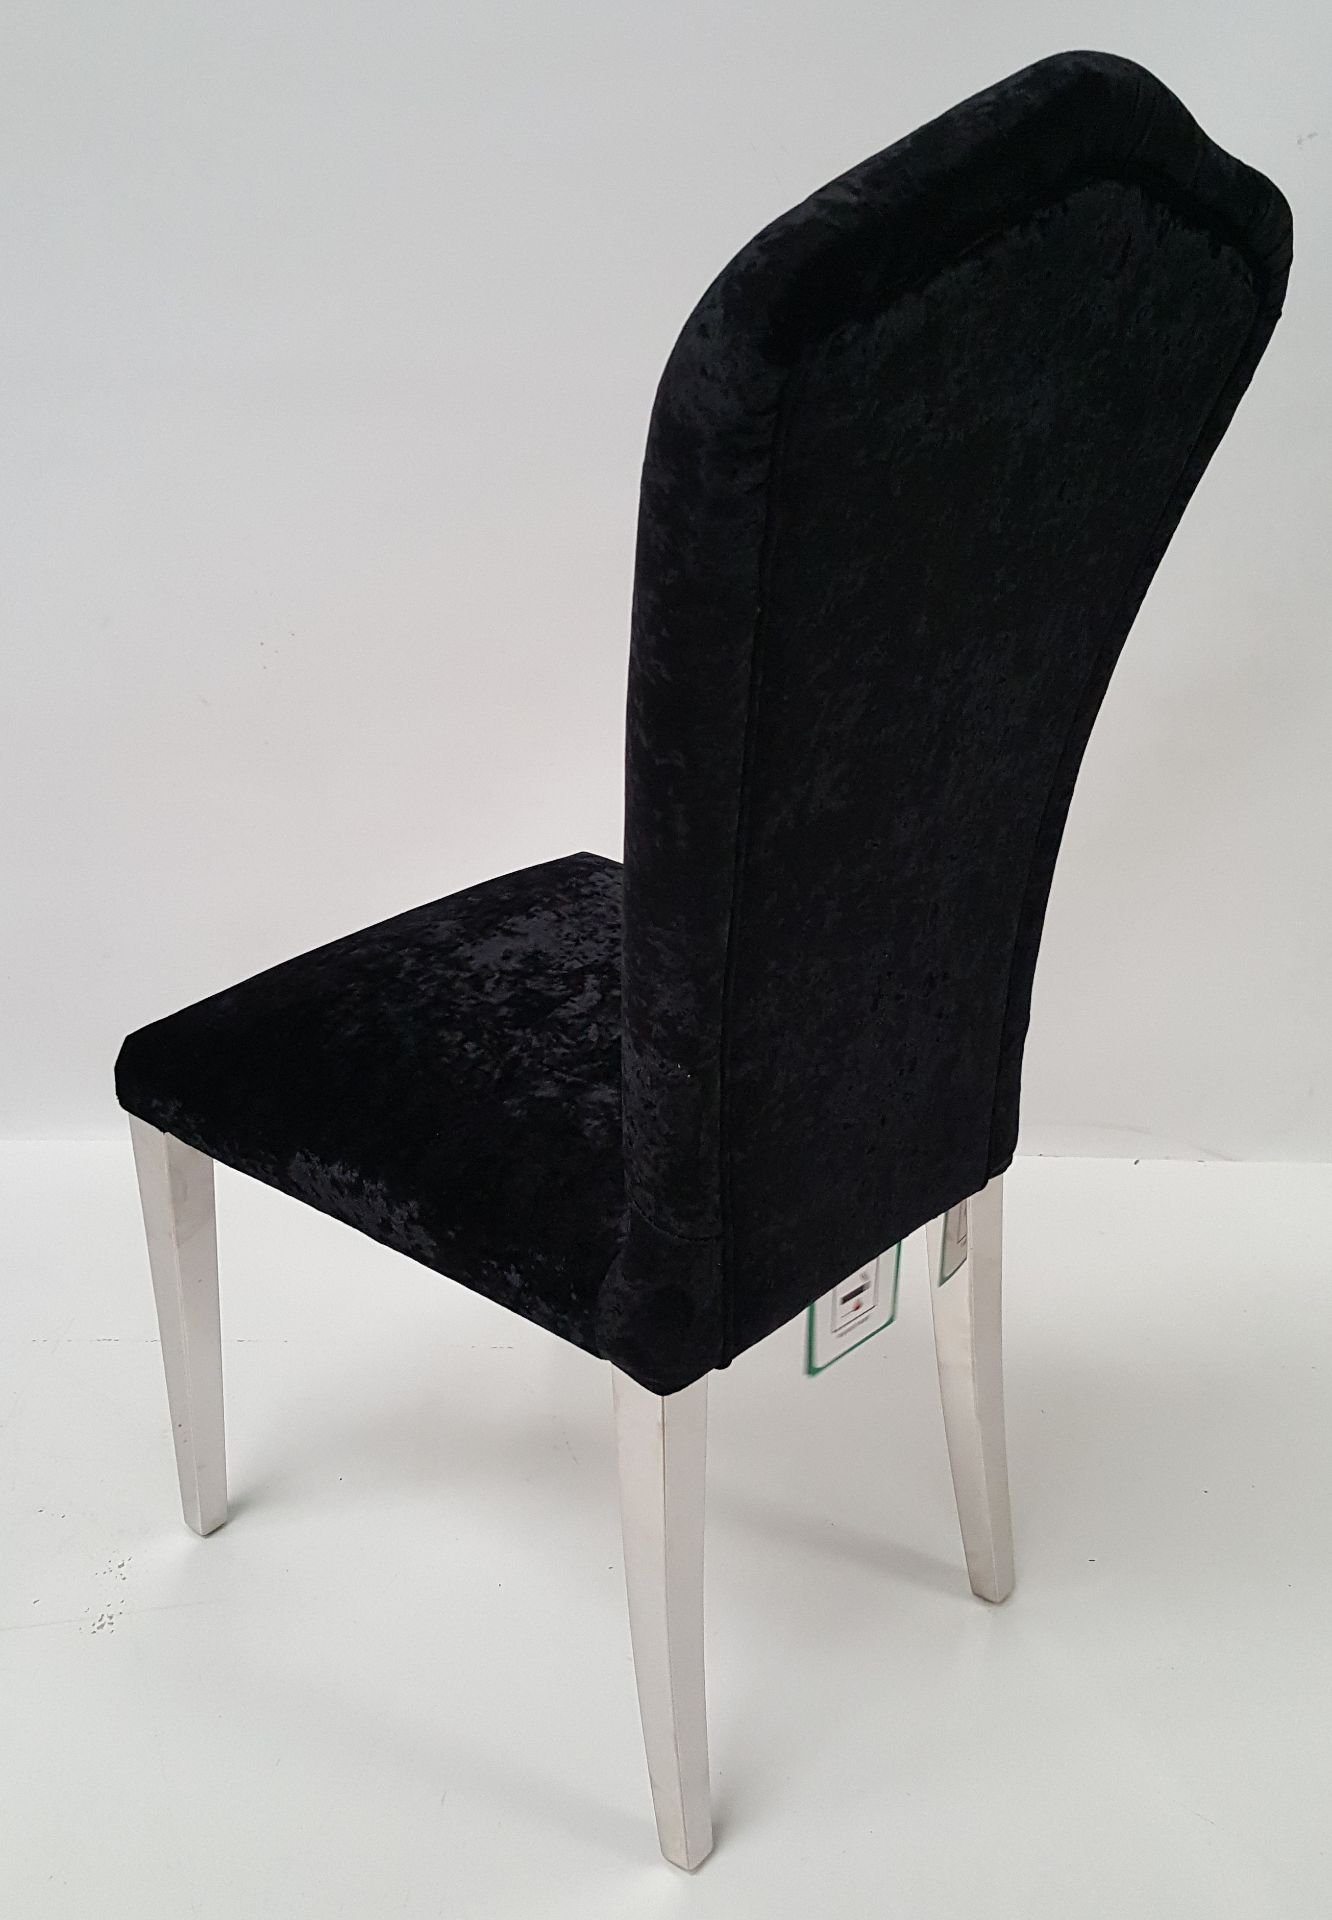 6 x STYLISH BLACK CRUSHED VELVET DINING TABLE CHAIRS - CL408 - Location: Altrincham WA14 - Image 6 of 6